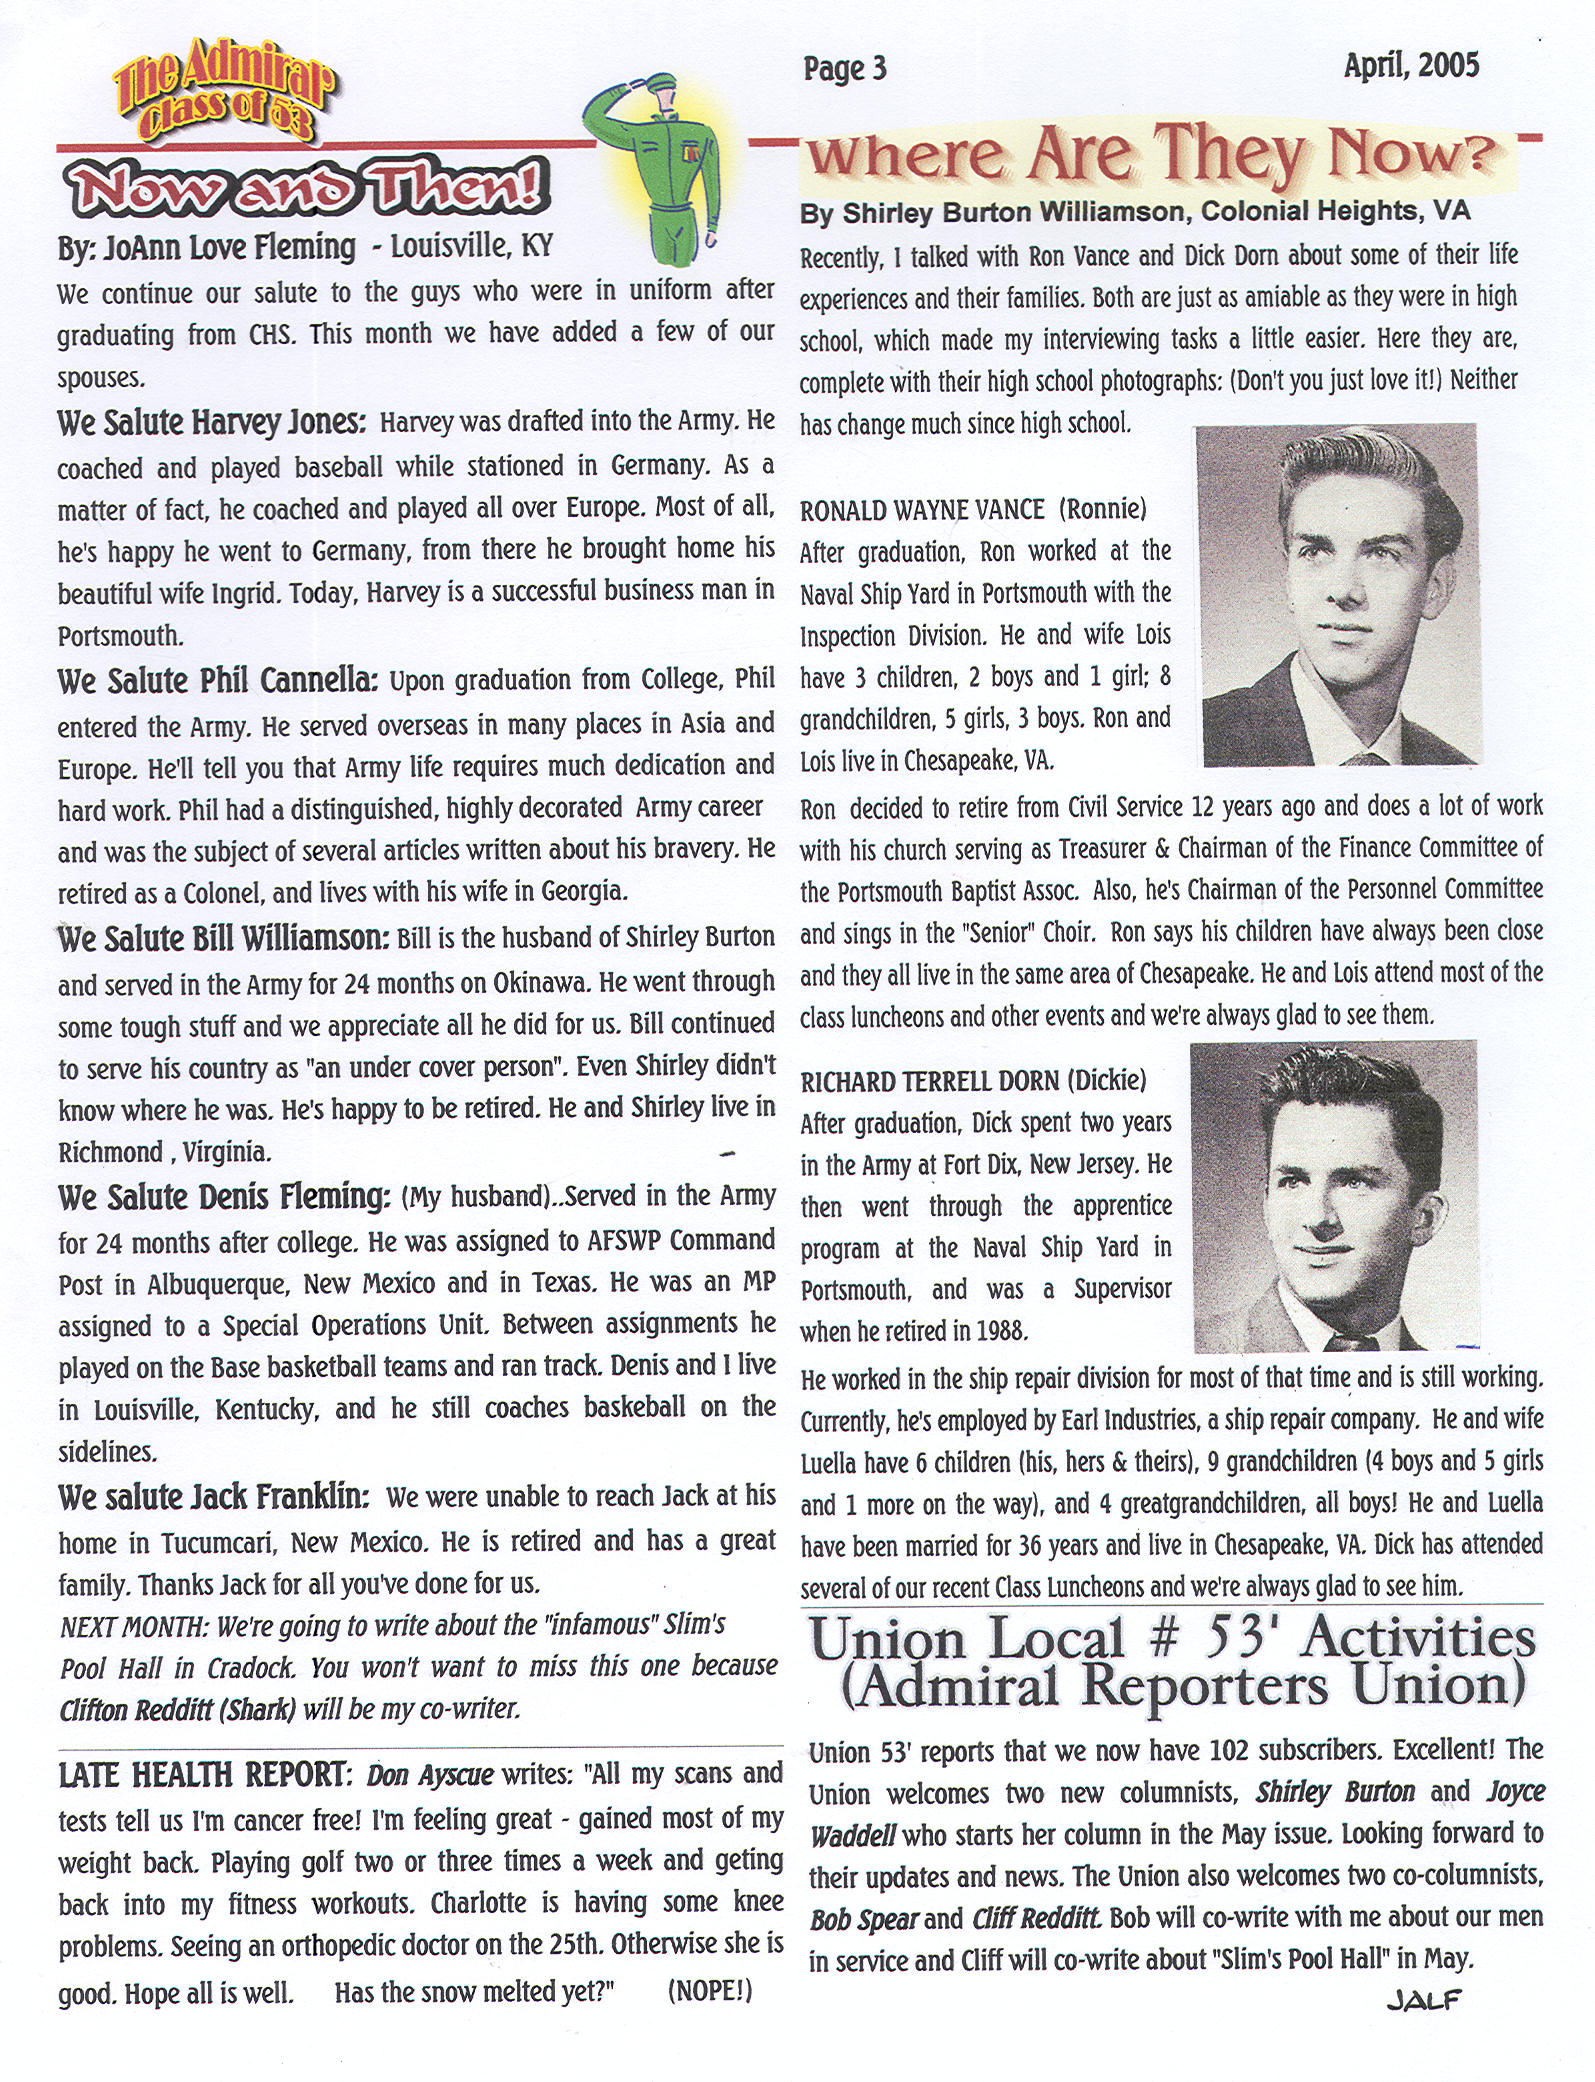 The Admiral - April 2005 - pg. 3